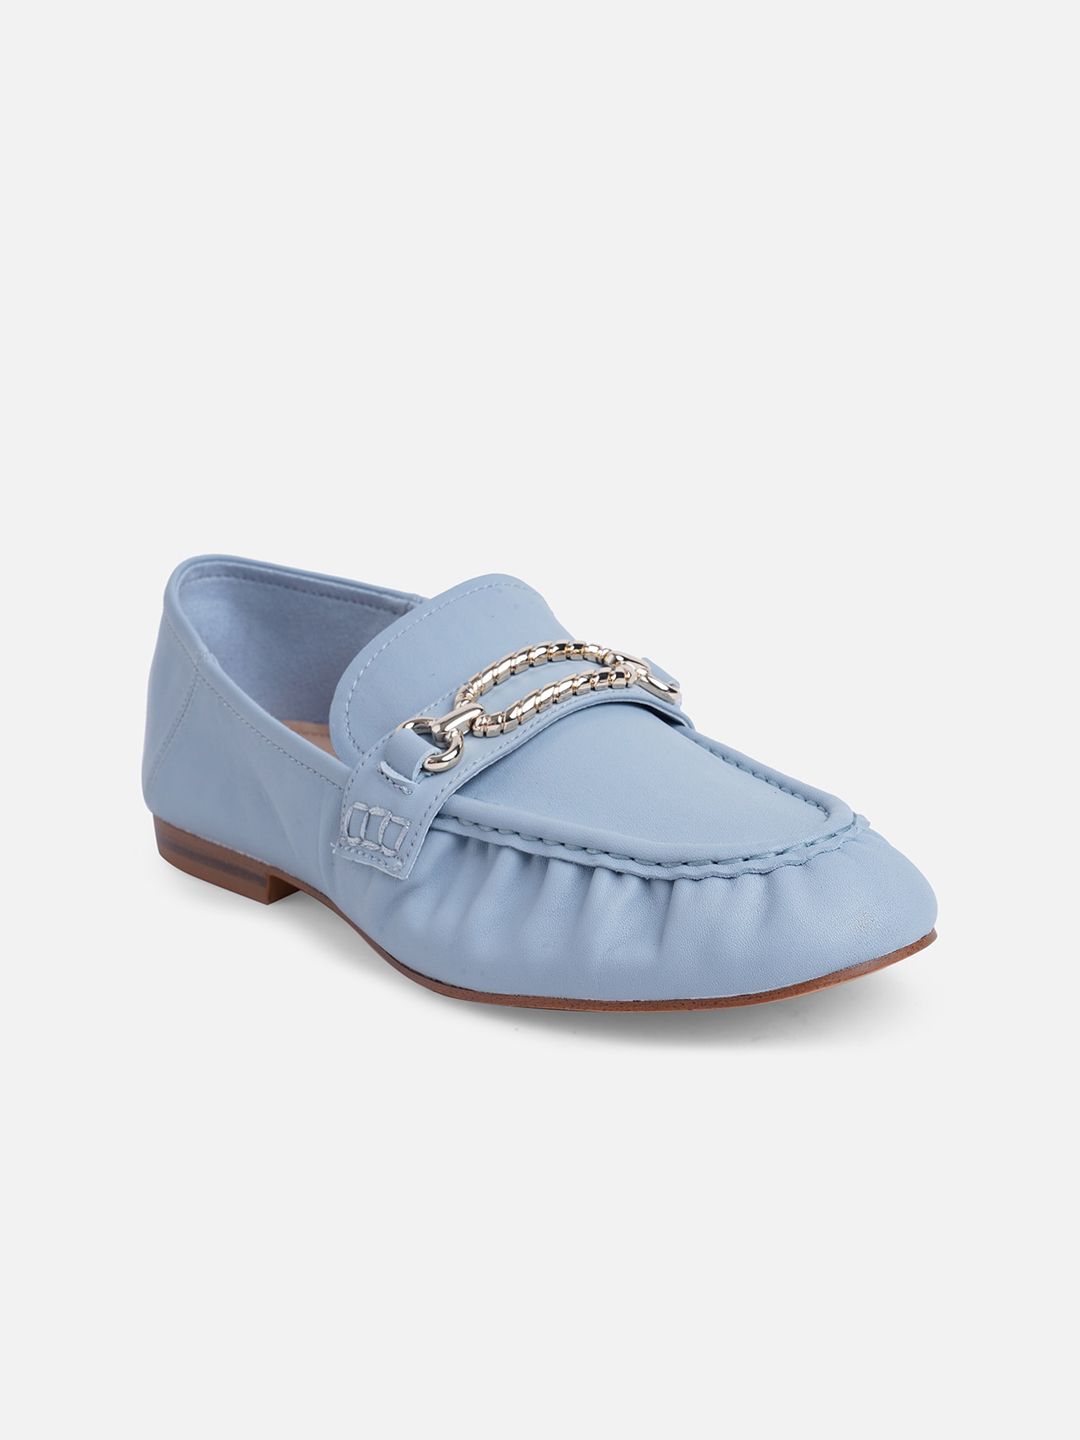 ALDO Women Blue Leather Loafers Price in India